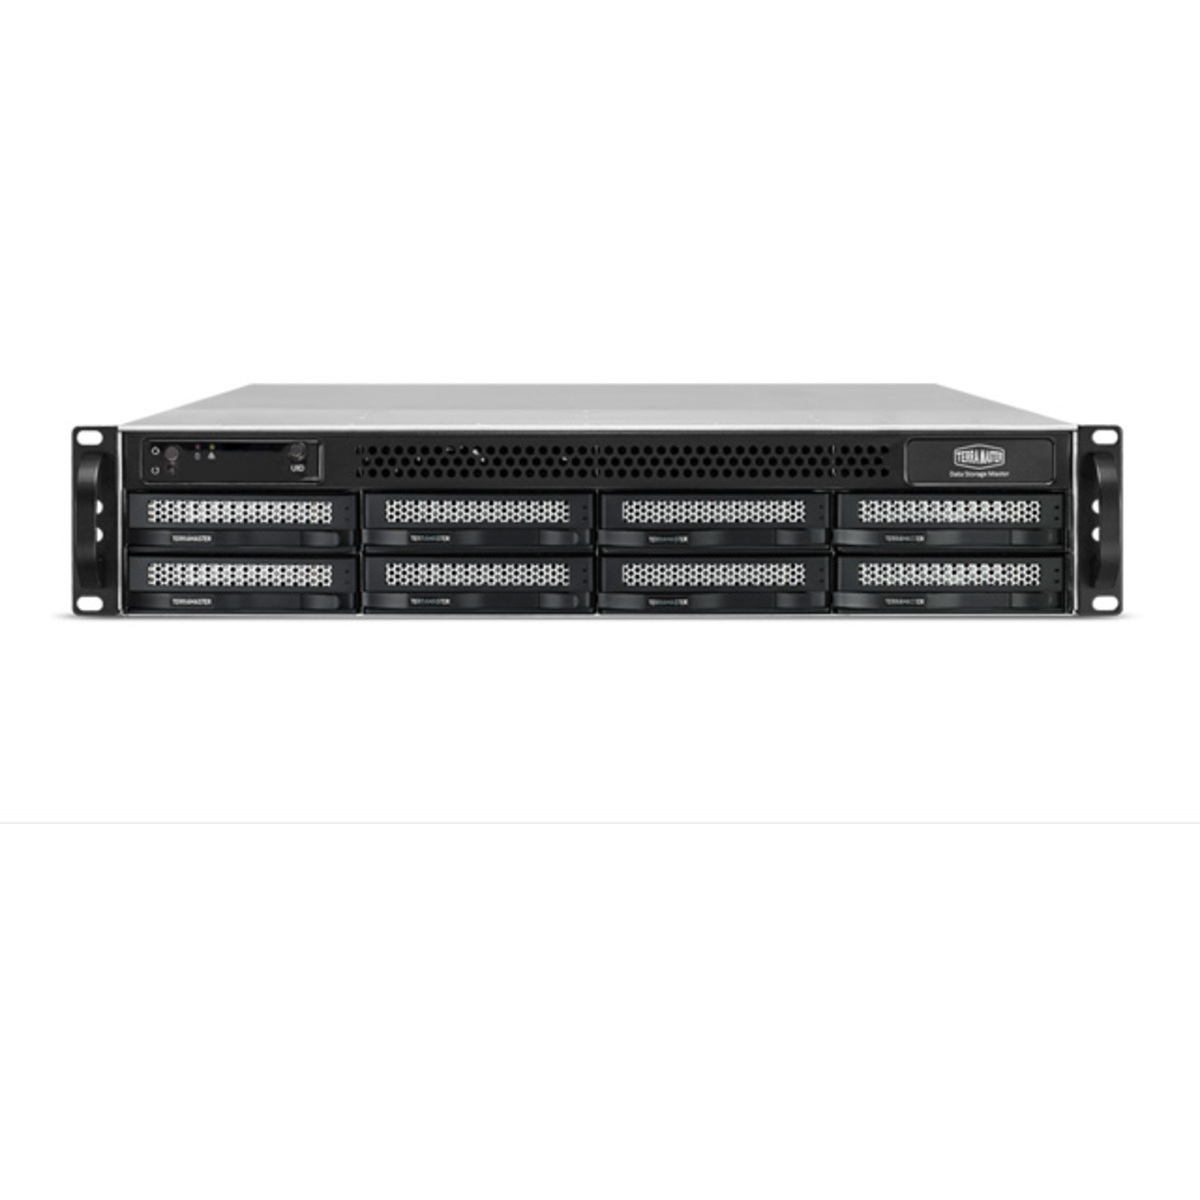 TerraMaster U8-423 14tb 8-Bay RackMount Multimedia / Power User / Business NAS - Network Attached Storage Device 7x2tb Western Digital Red Plus WD20EFZX 3.5 5400rpm SATA 6Gb/s HDD NAS Class Drives Installed - Burn-In Tested - FREE RAM UPGRADE U8-423